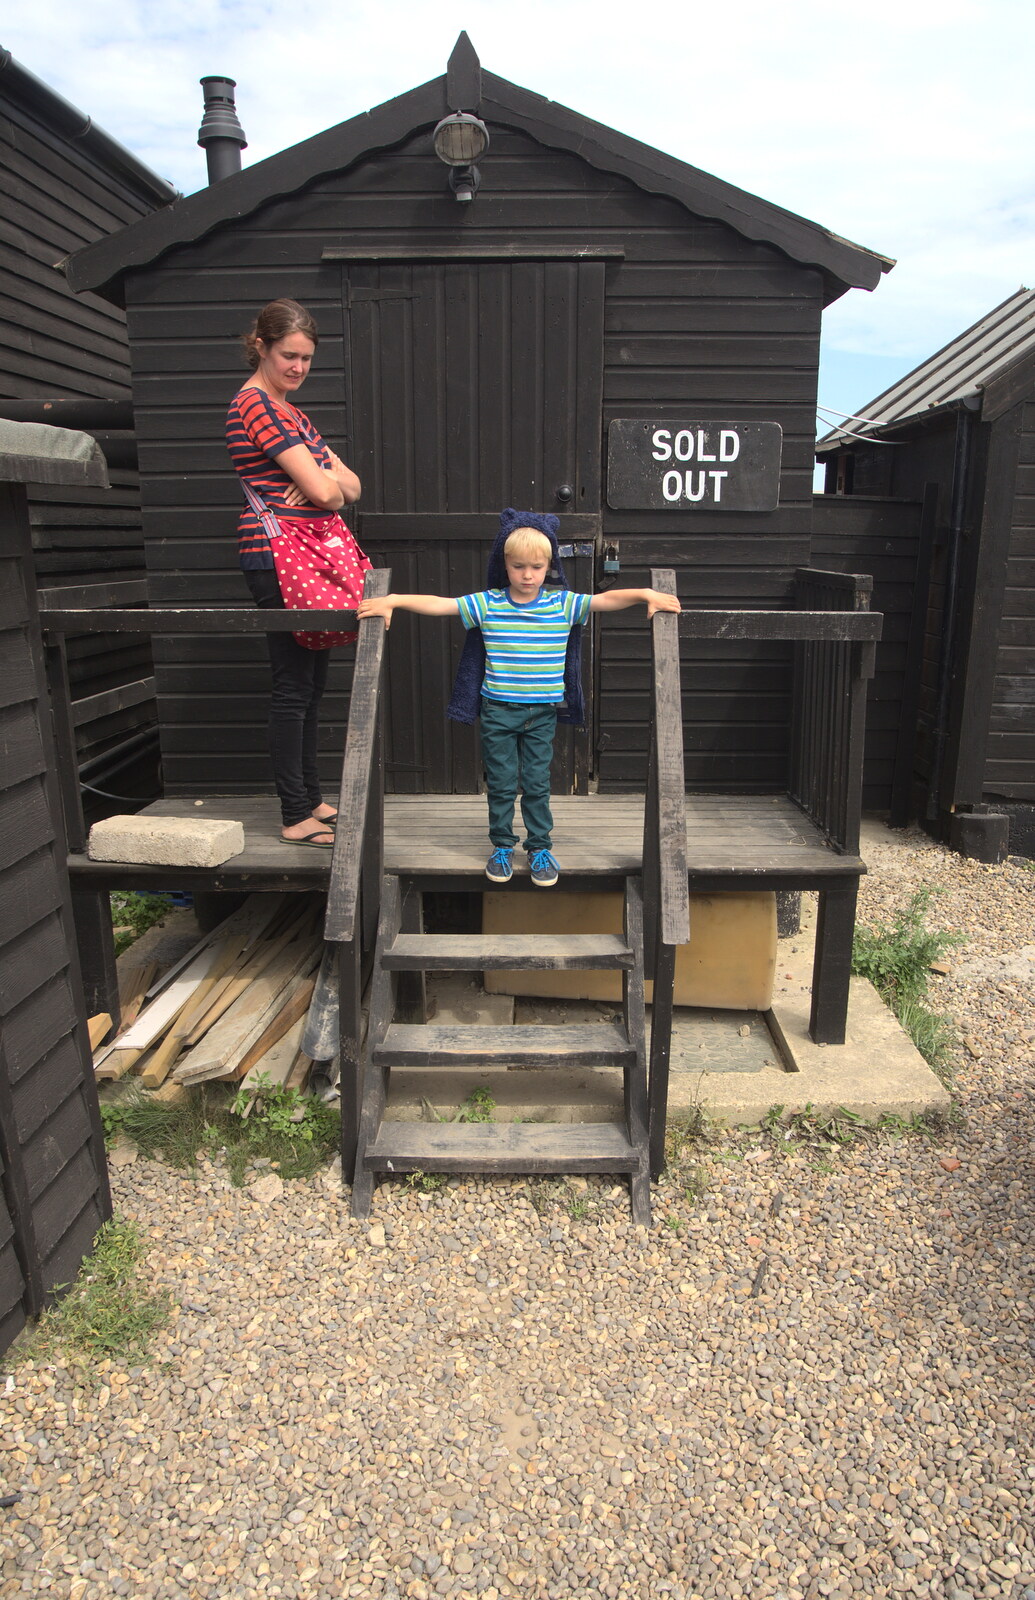 Harry comes out of the secret toilet from The Danger of Trees: A Camping (Mis)adventure - Southwold, Suffolk - 3rd August 2015